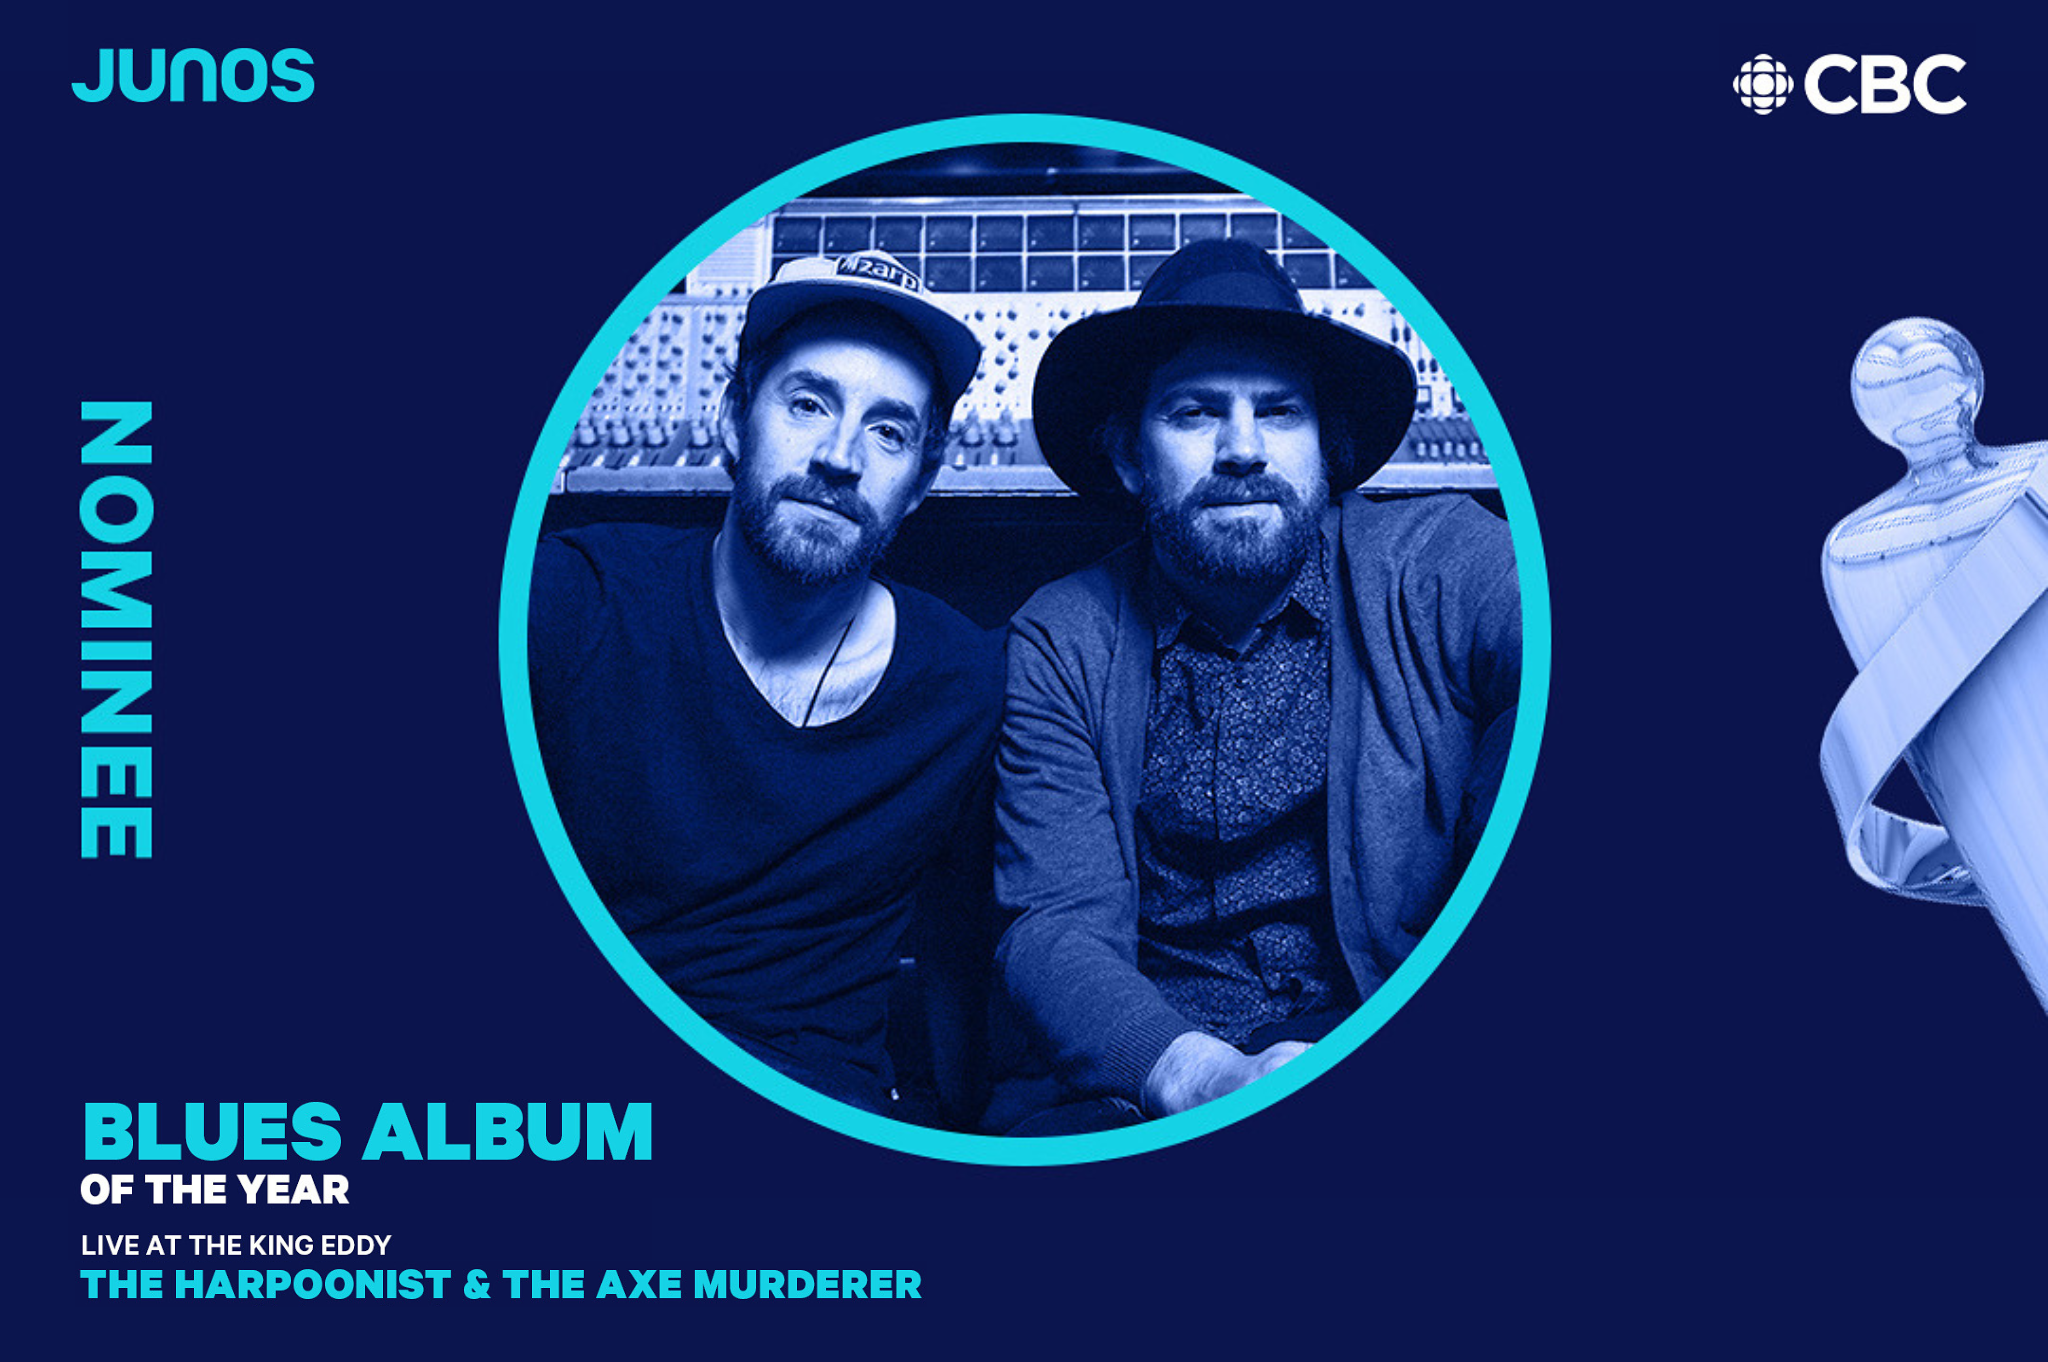 The Harpoonist & The Axe Murderer Nominated for JUNO Awards 2023 Blues Album of the Year